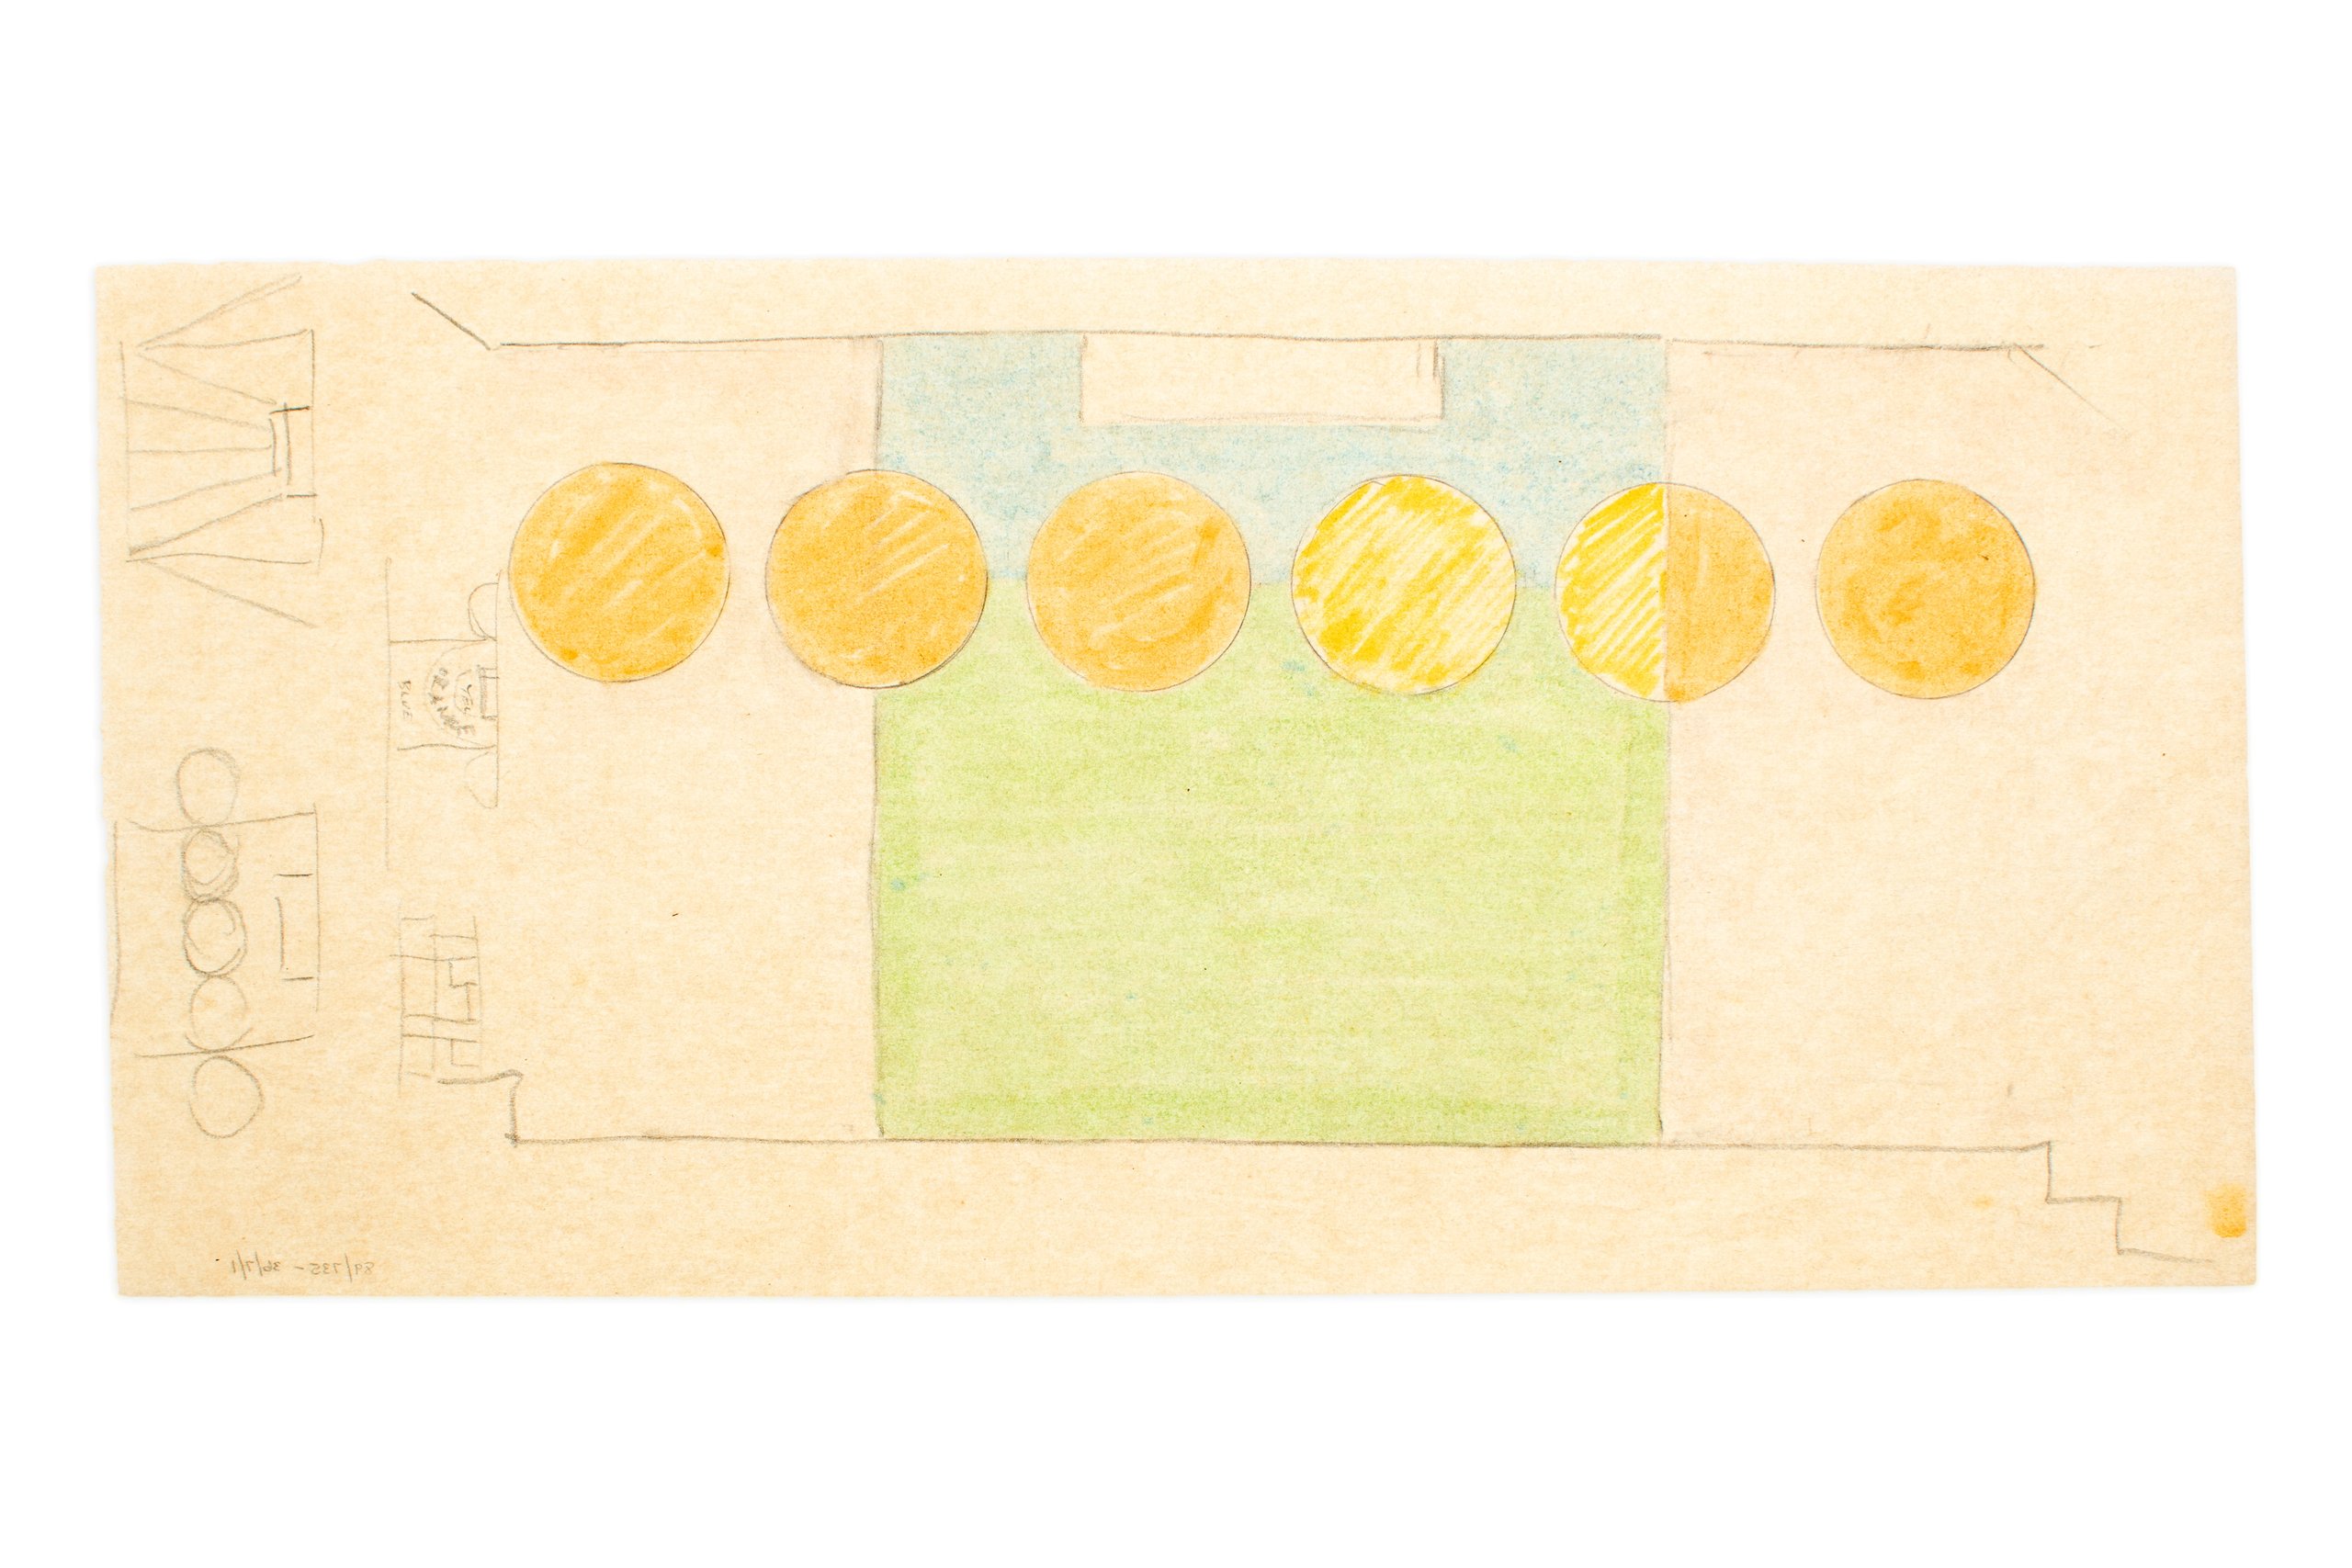 Design work for the RBA's banknote printing works by Gordon Andrews